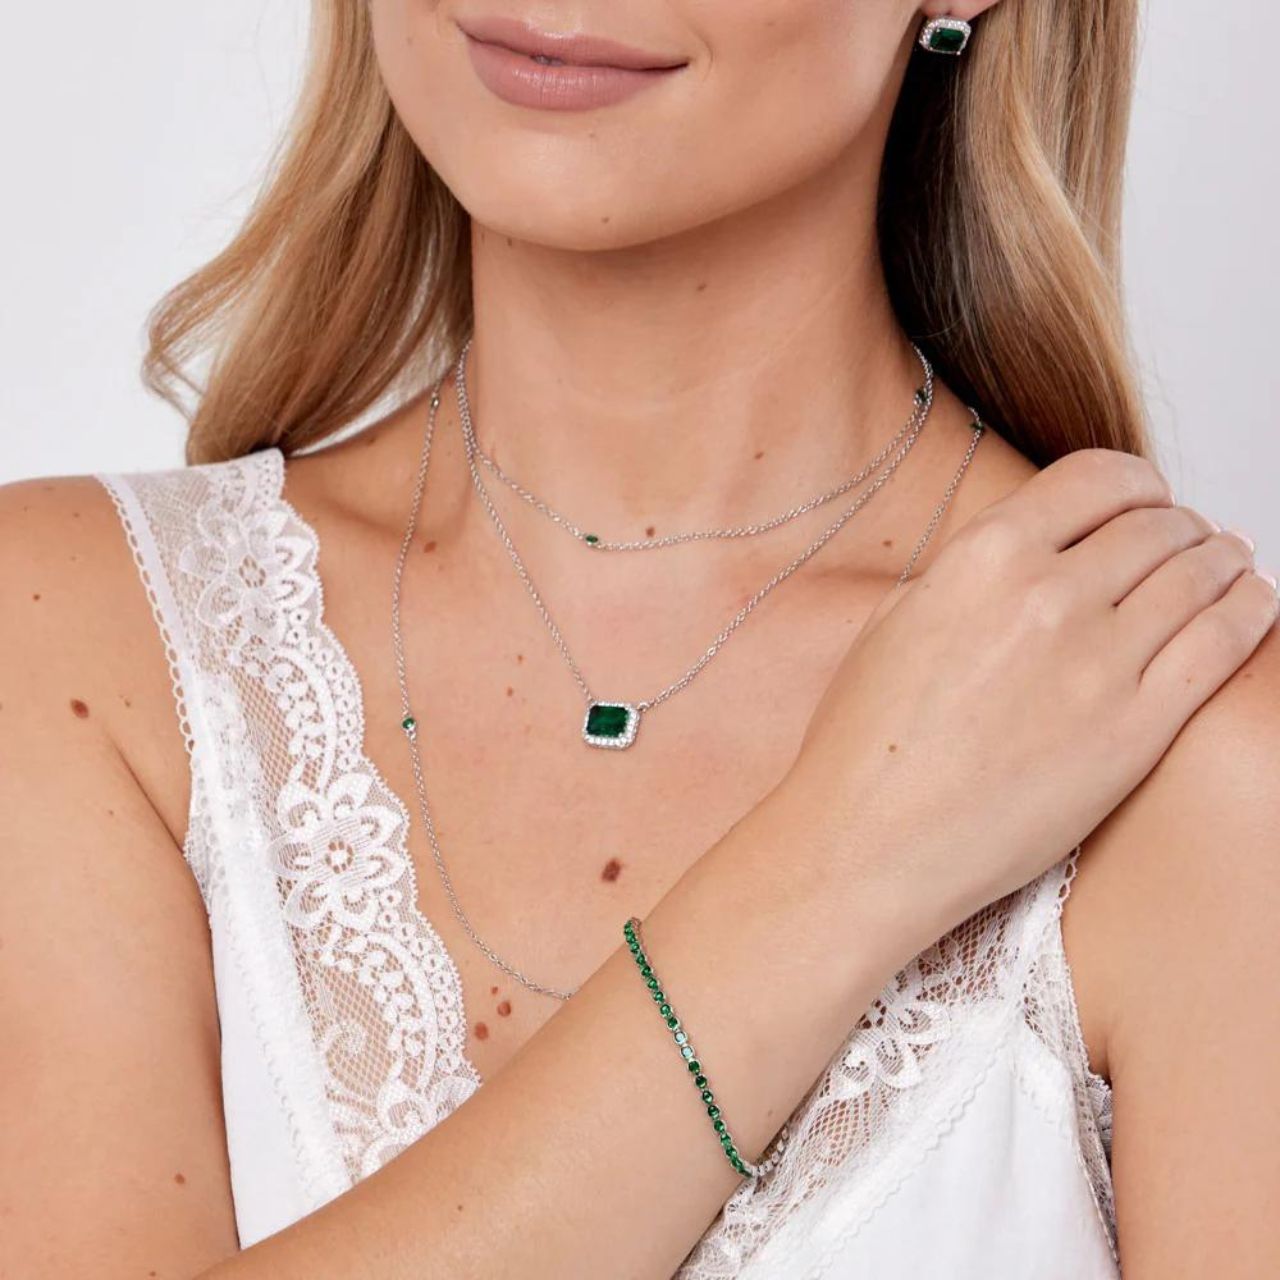 Dakota Emerald Tennis Bracelet by Knight & Day  Miniature rhodium plated tennis bracelet with Emerald CZ stones. Elegant when worn alone and also ideal for layering with watch or other bracelets. Fold over clip fastening.